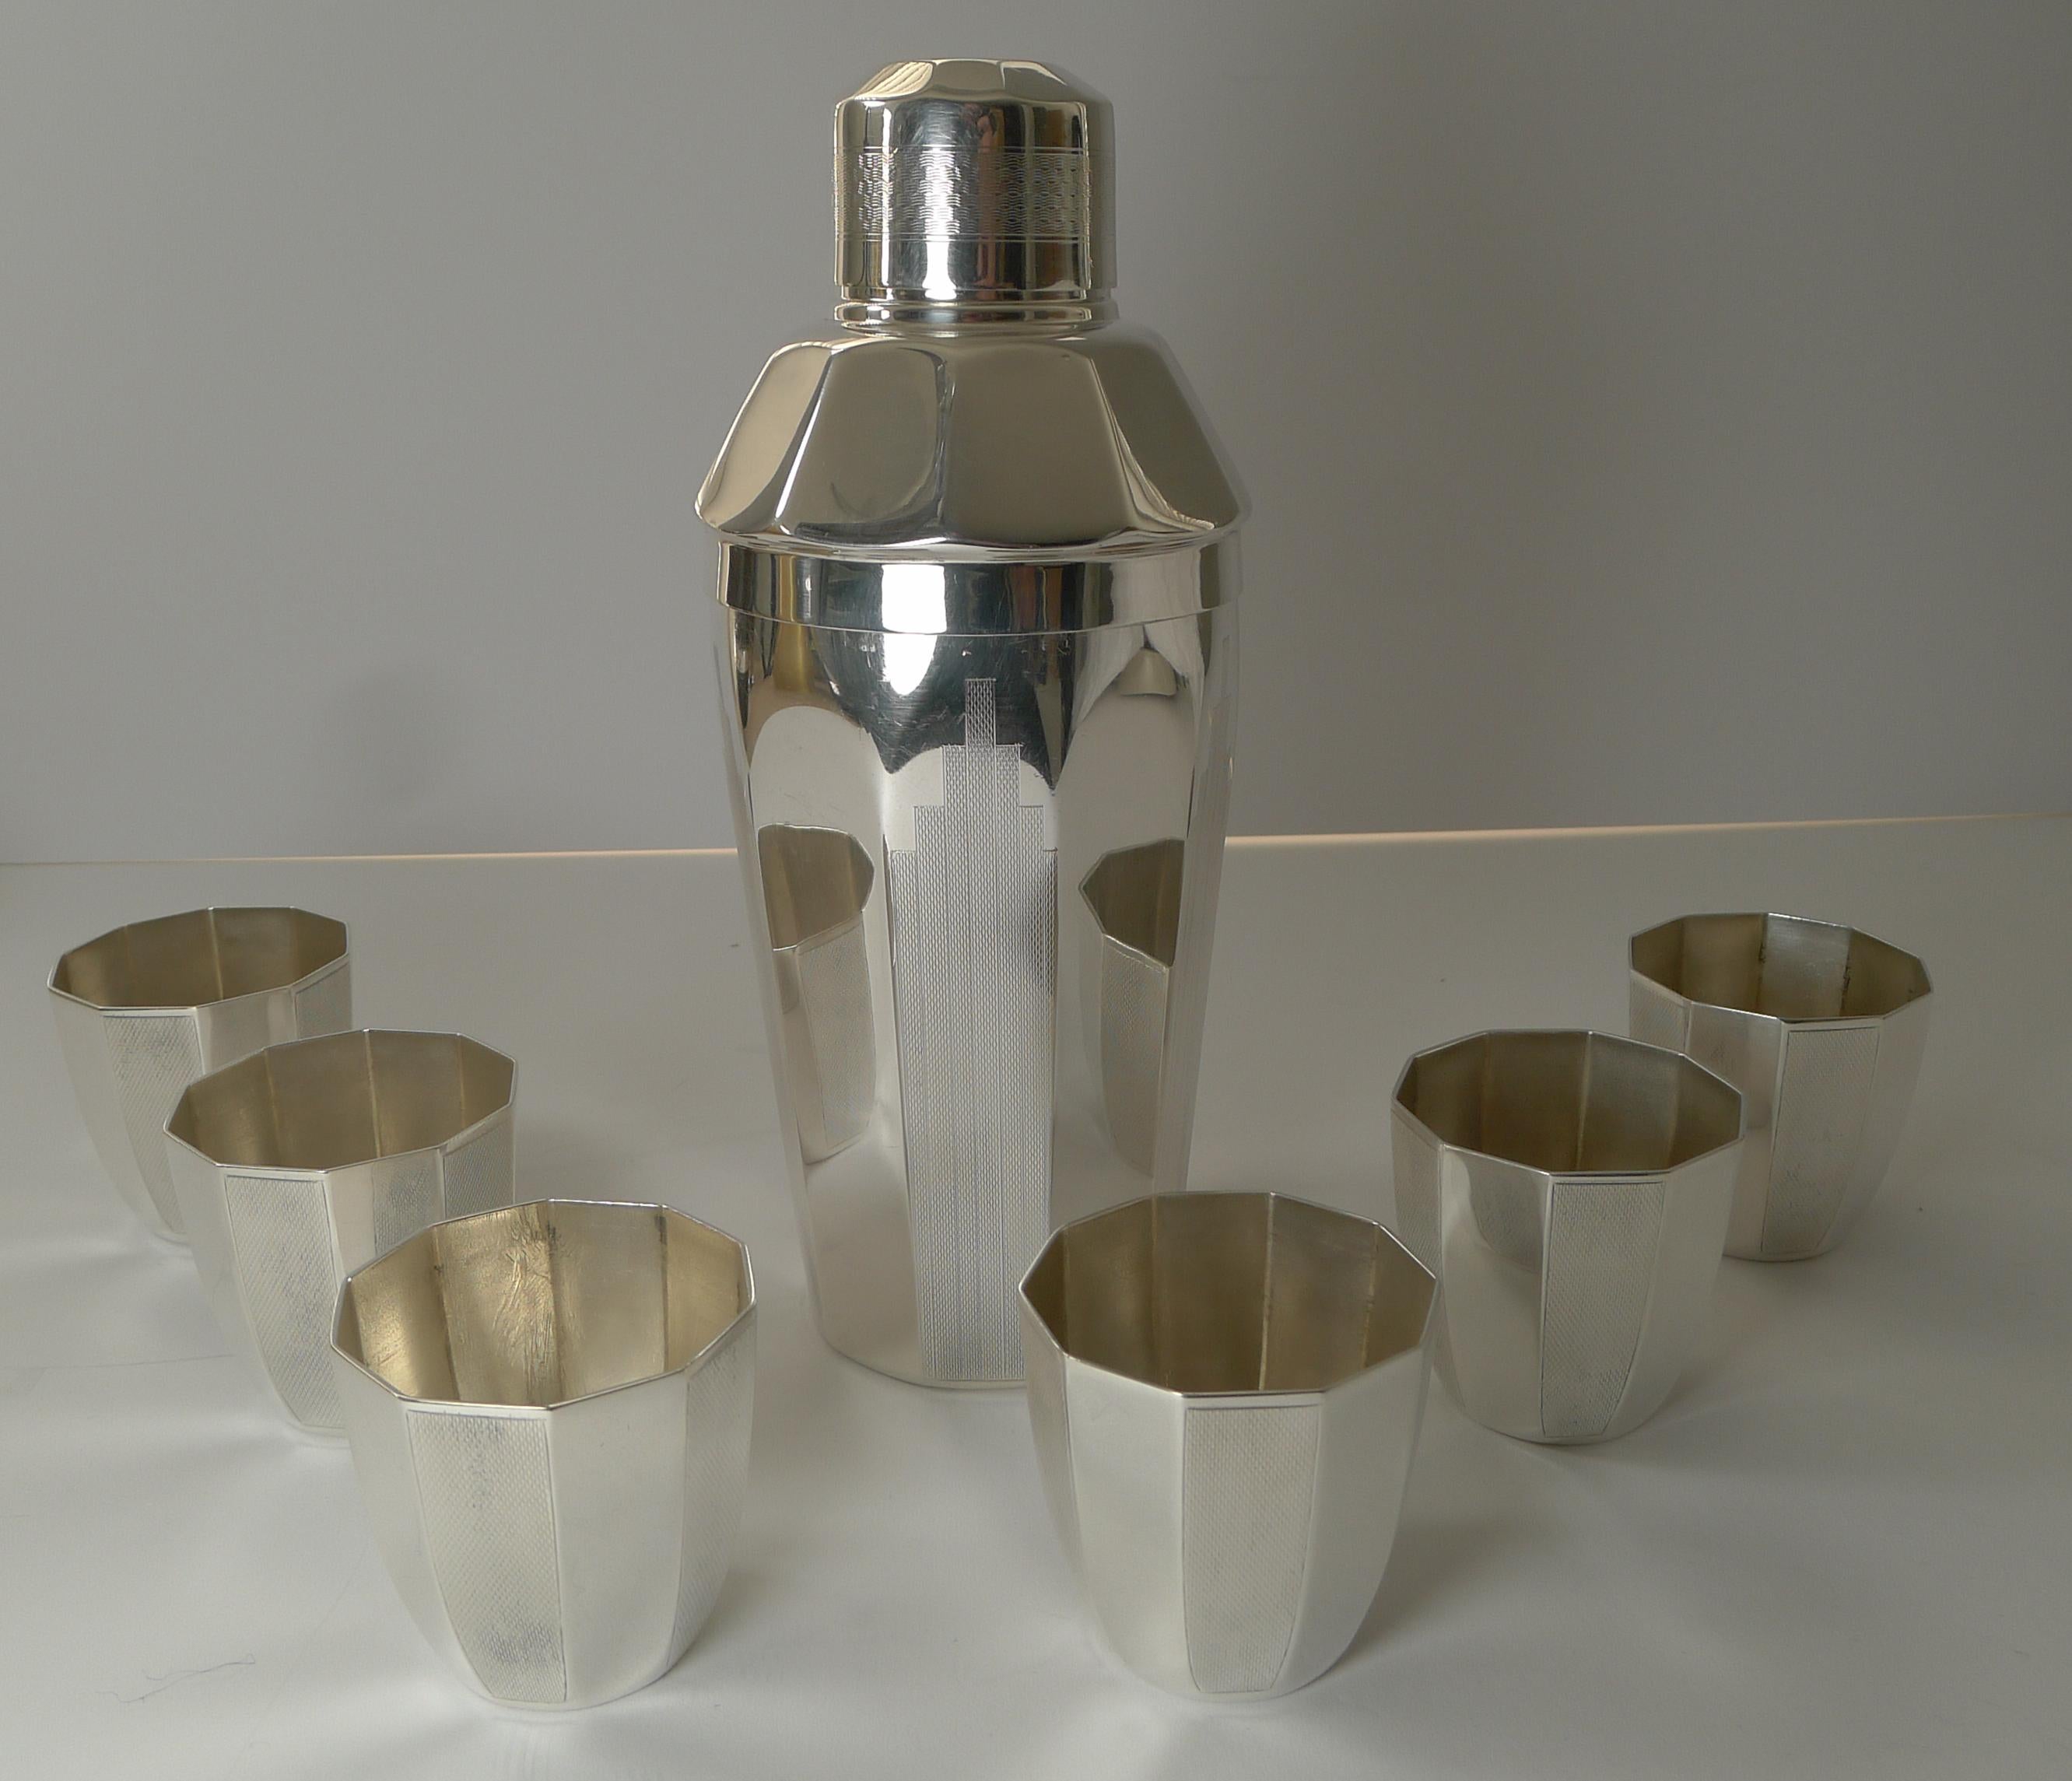 Mid-20th Century English Art Deco Silver Plated Cocktail Shaker / Set by Elkington & Co.